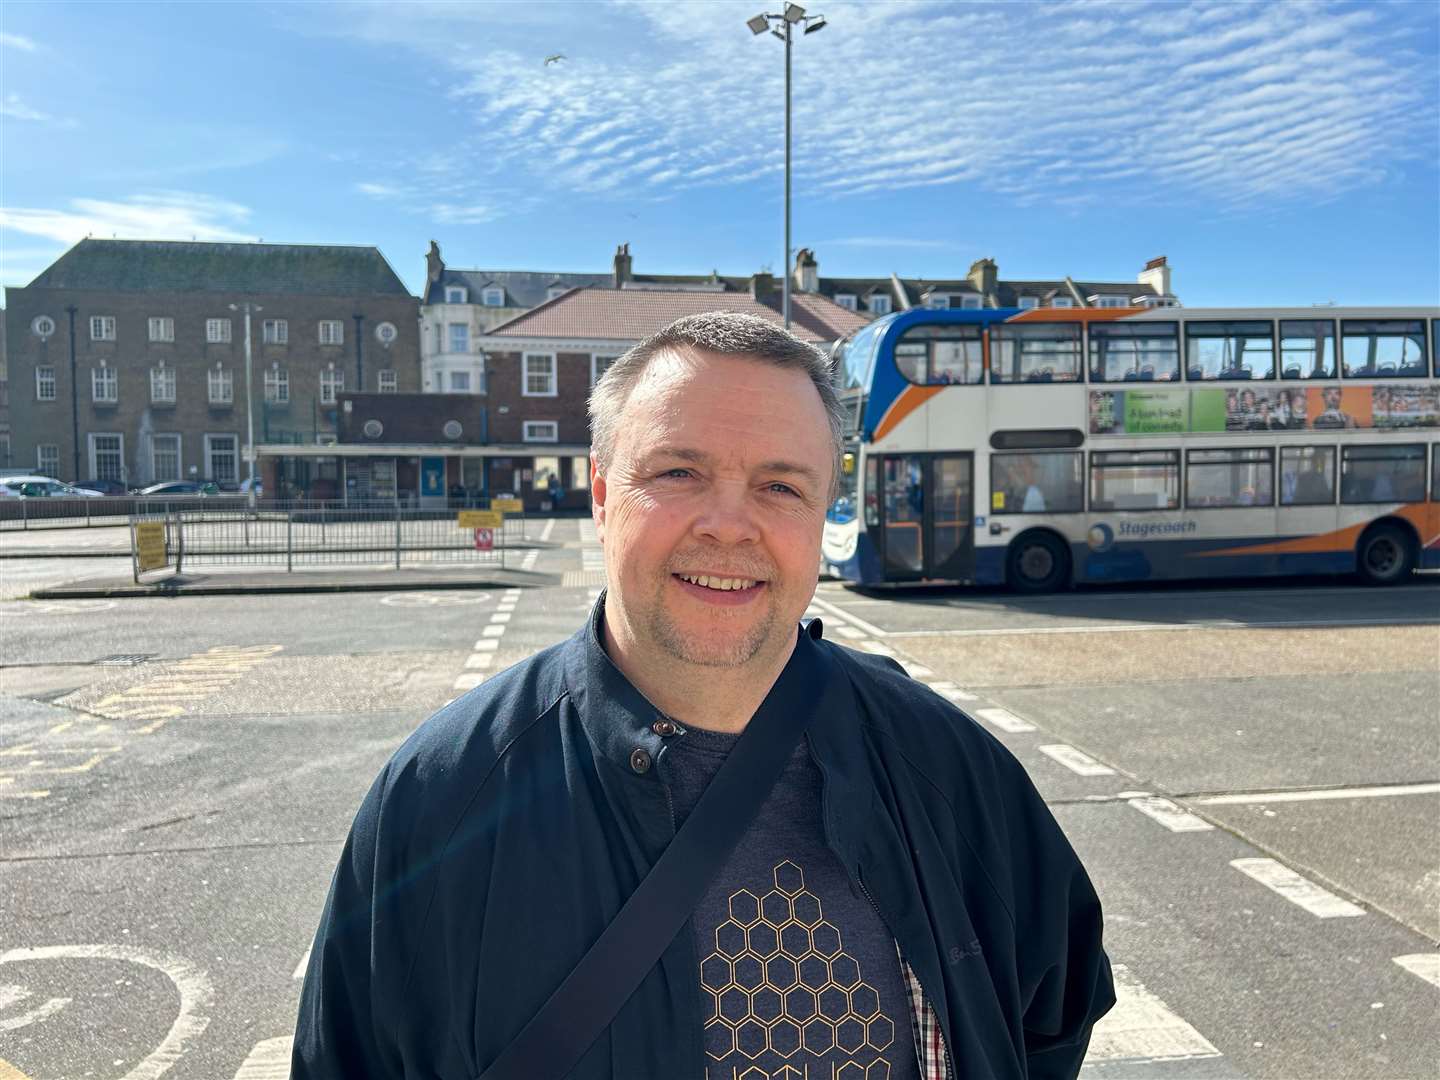 James Galaszia is in favour of the plans to transform Folkestone bus station